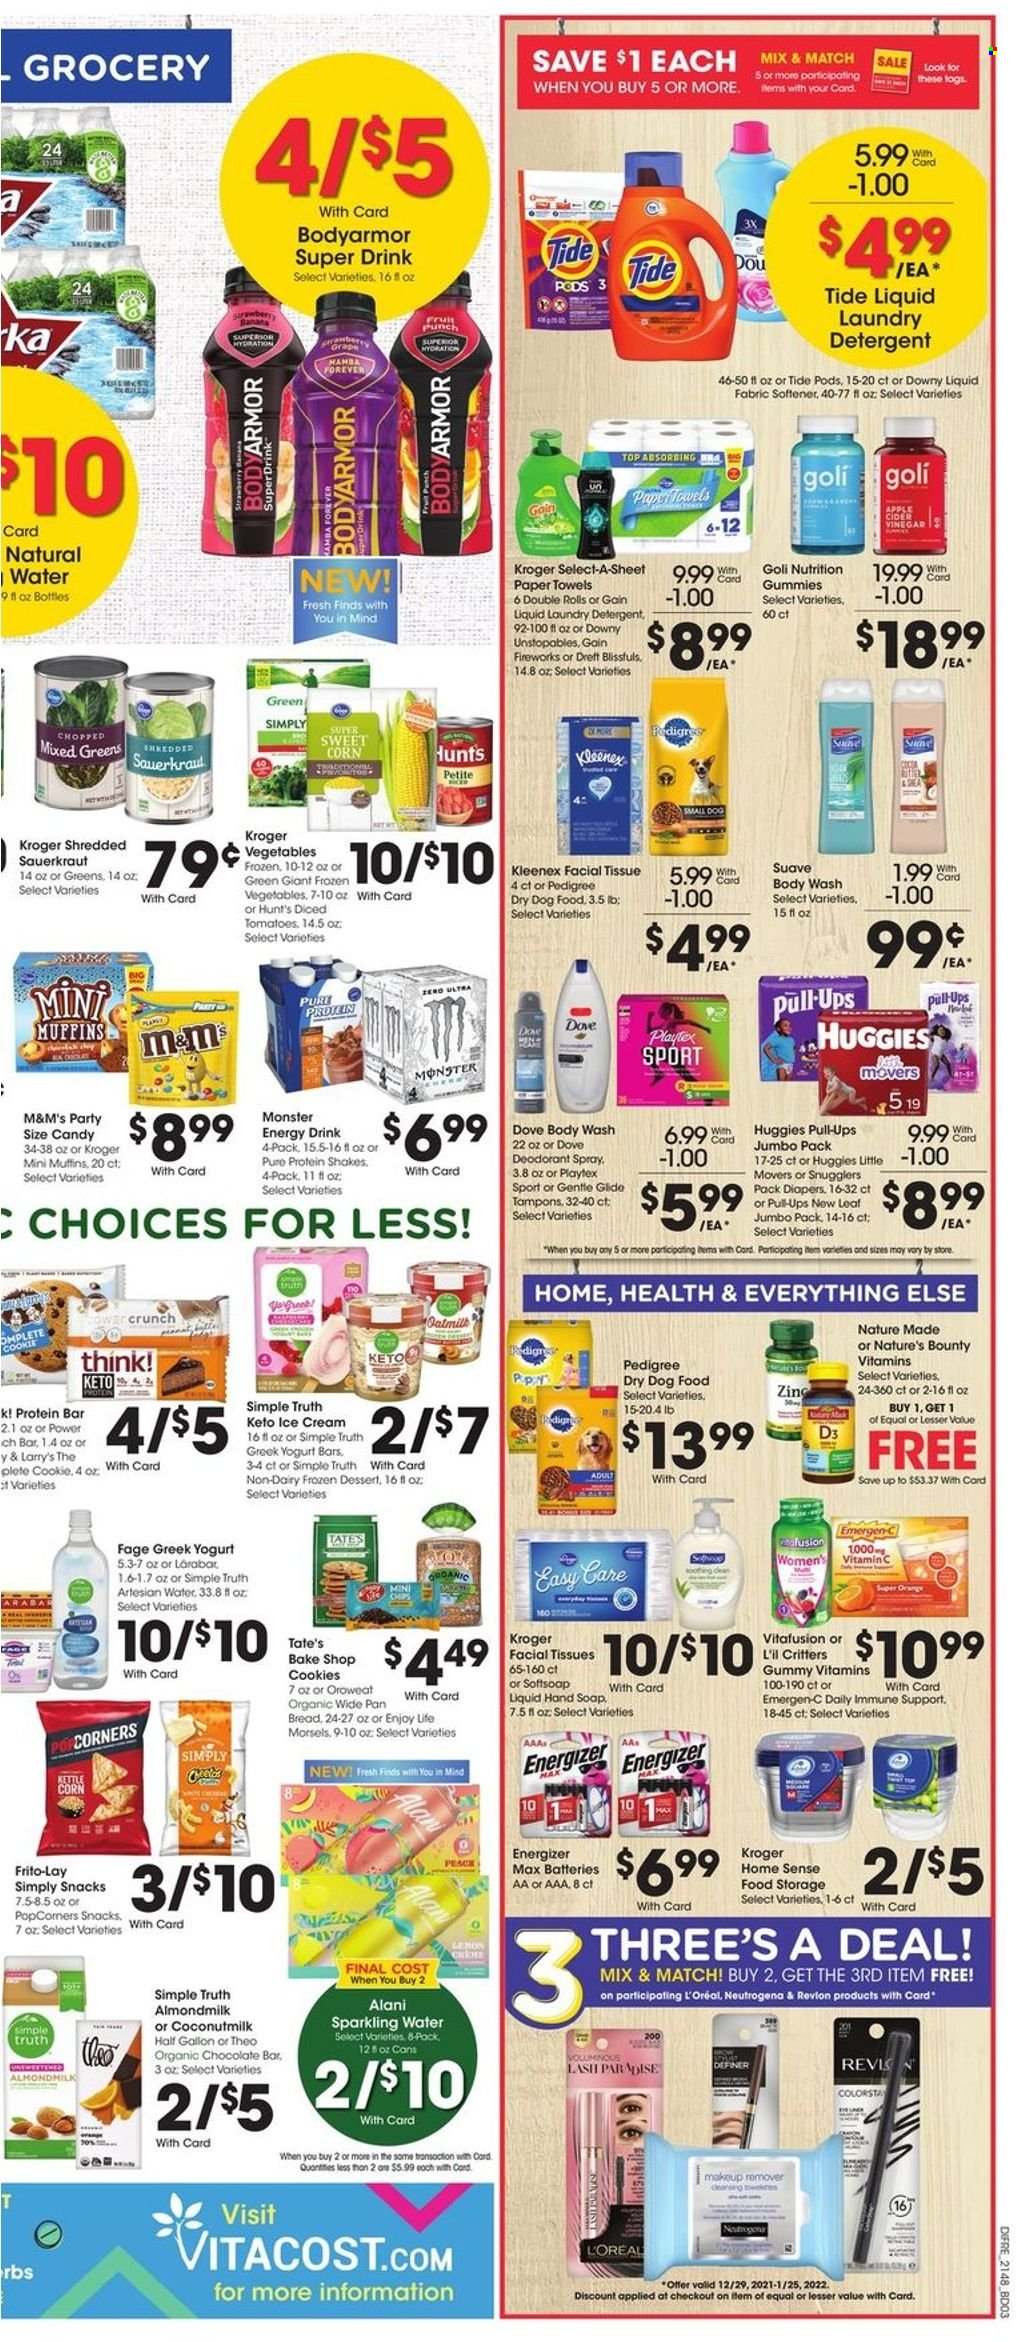 thumbnail - Baker's Flyer - 12/29/2021 - 01/04/2022 - Sales products - muffin, tomatoes, sweet corn, greek yoghurt, almond milk, protein drink, shake, ice cream, Enlightened lce Cream, frozen vegetables, cookies, snack, M&M's, chocolate bar, kettle corn, popcorn, Frito-Lay, coconut milk, sauerkraut, protein bar, energy drink, Monster, sparkling water, punch, Huggies, nappies, Dove, Kleenex, tissues, kitchen towels, paper towels, detergent, Gain, Tide, Unstopables, fabric softener, laundry detergent, Gain Fireworks, Downy Laundry, body wash, Softsoap, Suave, Playtex, tampons, facial tissues, L’Oréal, Neutrogena, anti-perspirant, deodorant, makeup remover, pan, battery, Energizer, animal food, dog food, Pedigree, dry dog food, Nature Made, Nature's Bounty, Vitafusion, vitamin c, Emergen-C, vitamin D3. Page 6.